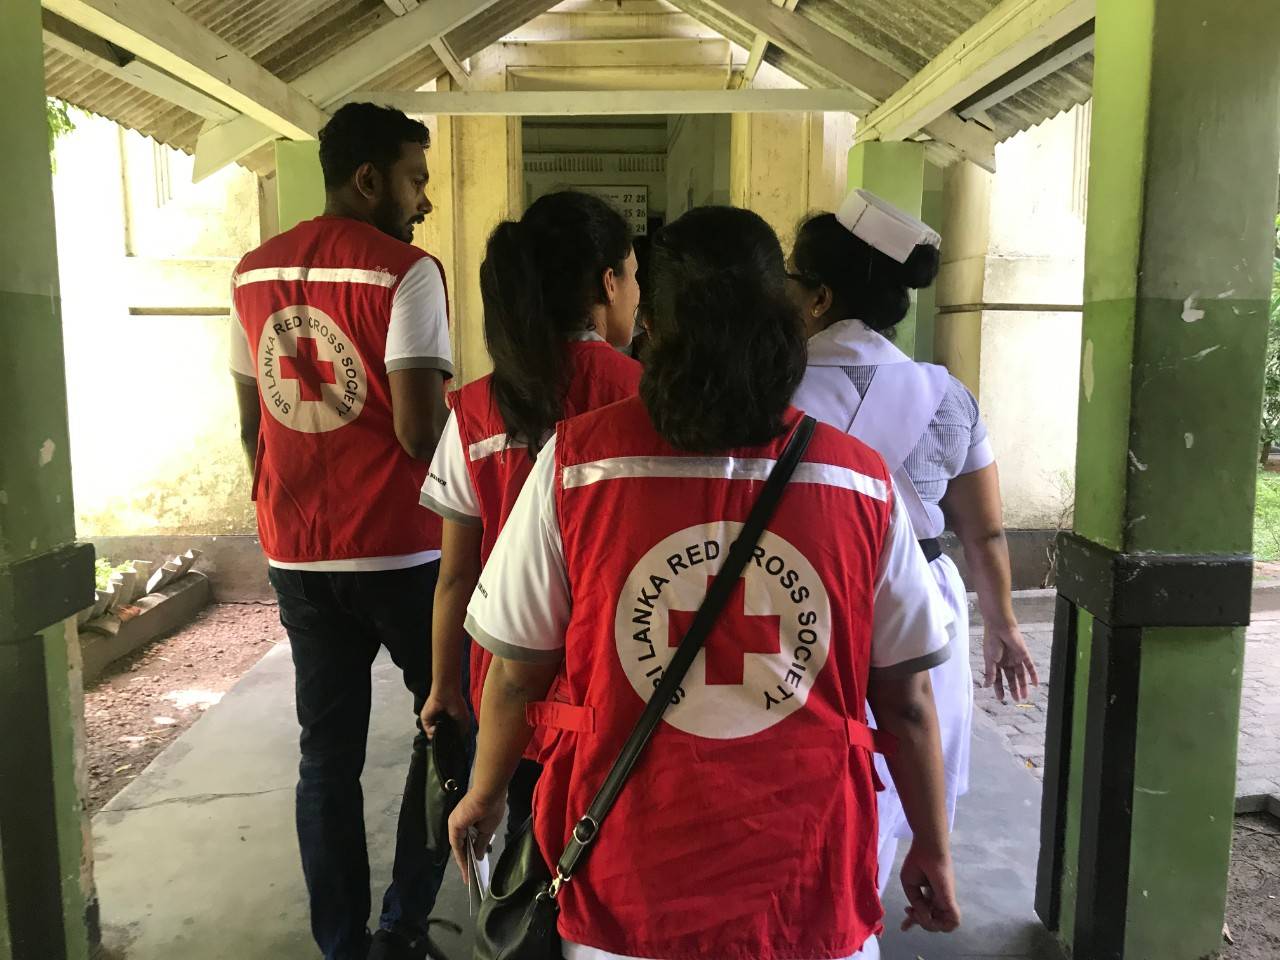 Sri Lanka, Colombo, April 2019. At Colombo National Hospital, Sri Lanka Red Cross Society RFL (Restoring Family Links) teams help connect survivors with their loved ones after eight explosions on 21 April 2019. 